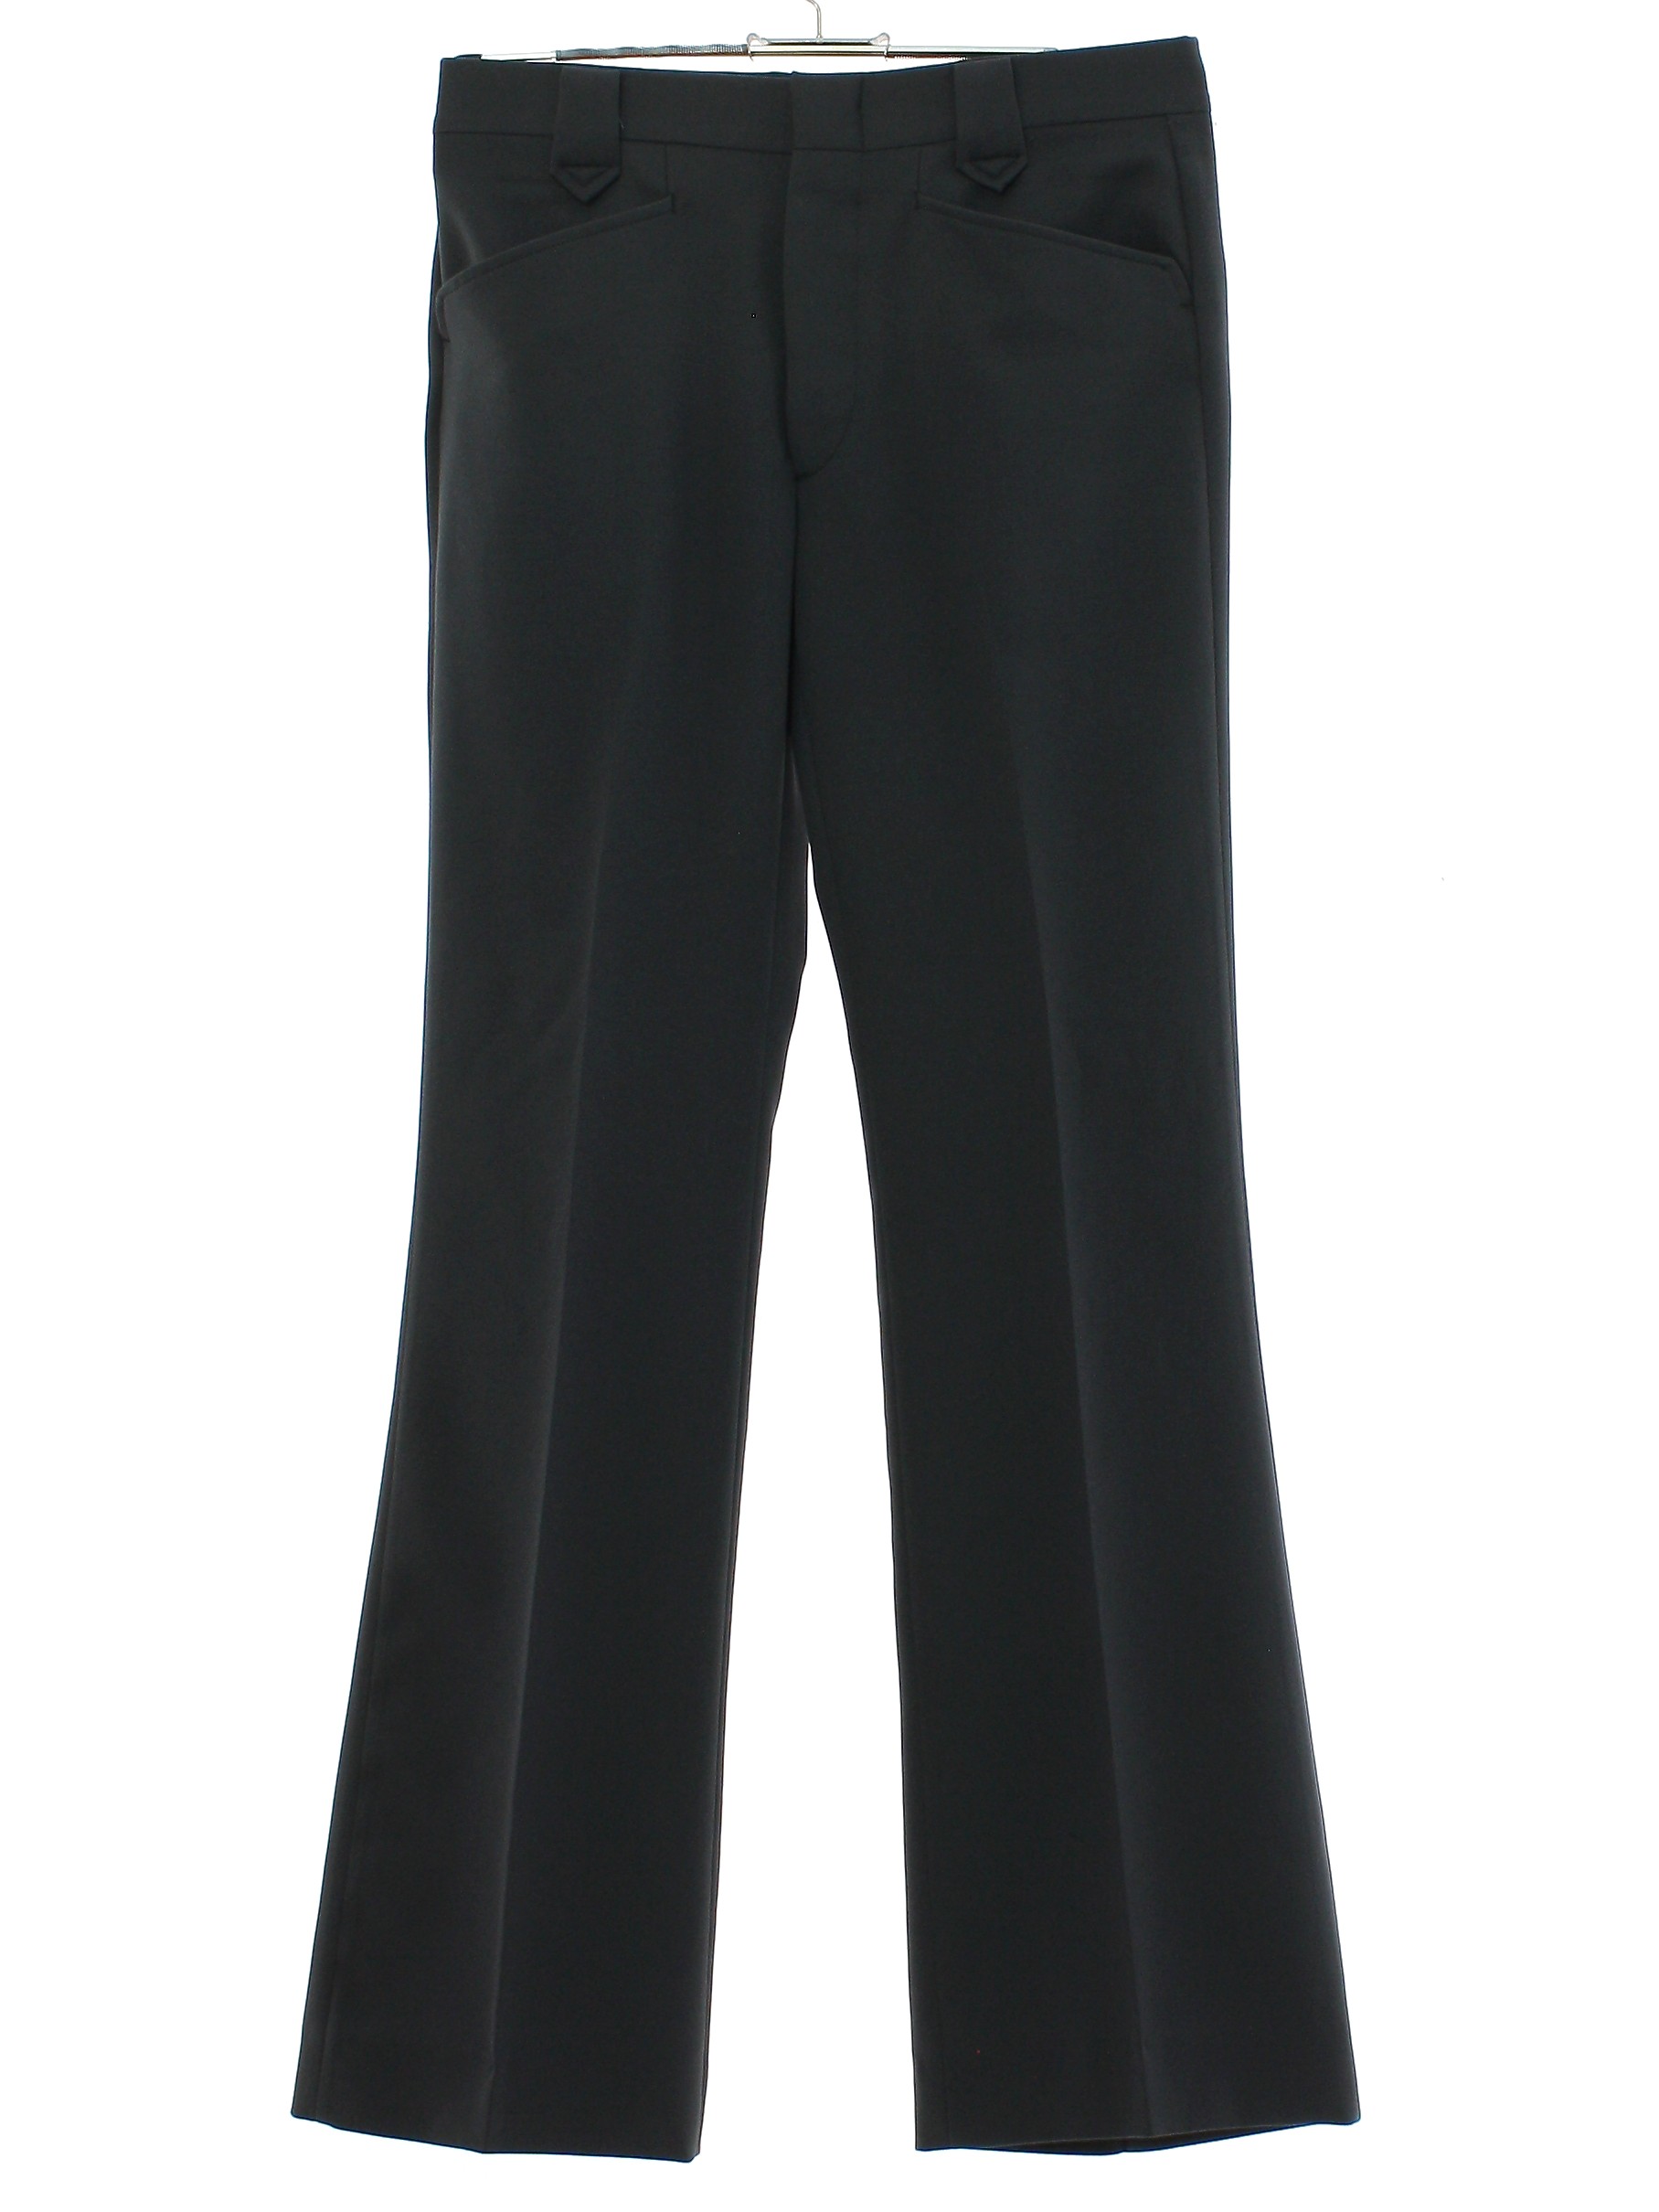 Seventies Vintage Flared Pants / Flares: 70s -Circle S- Mens charcoal ...